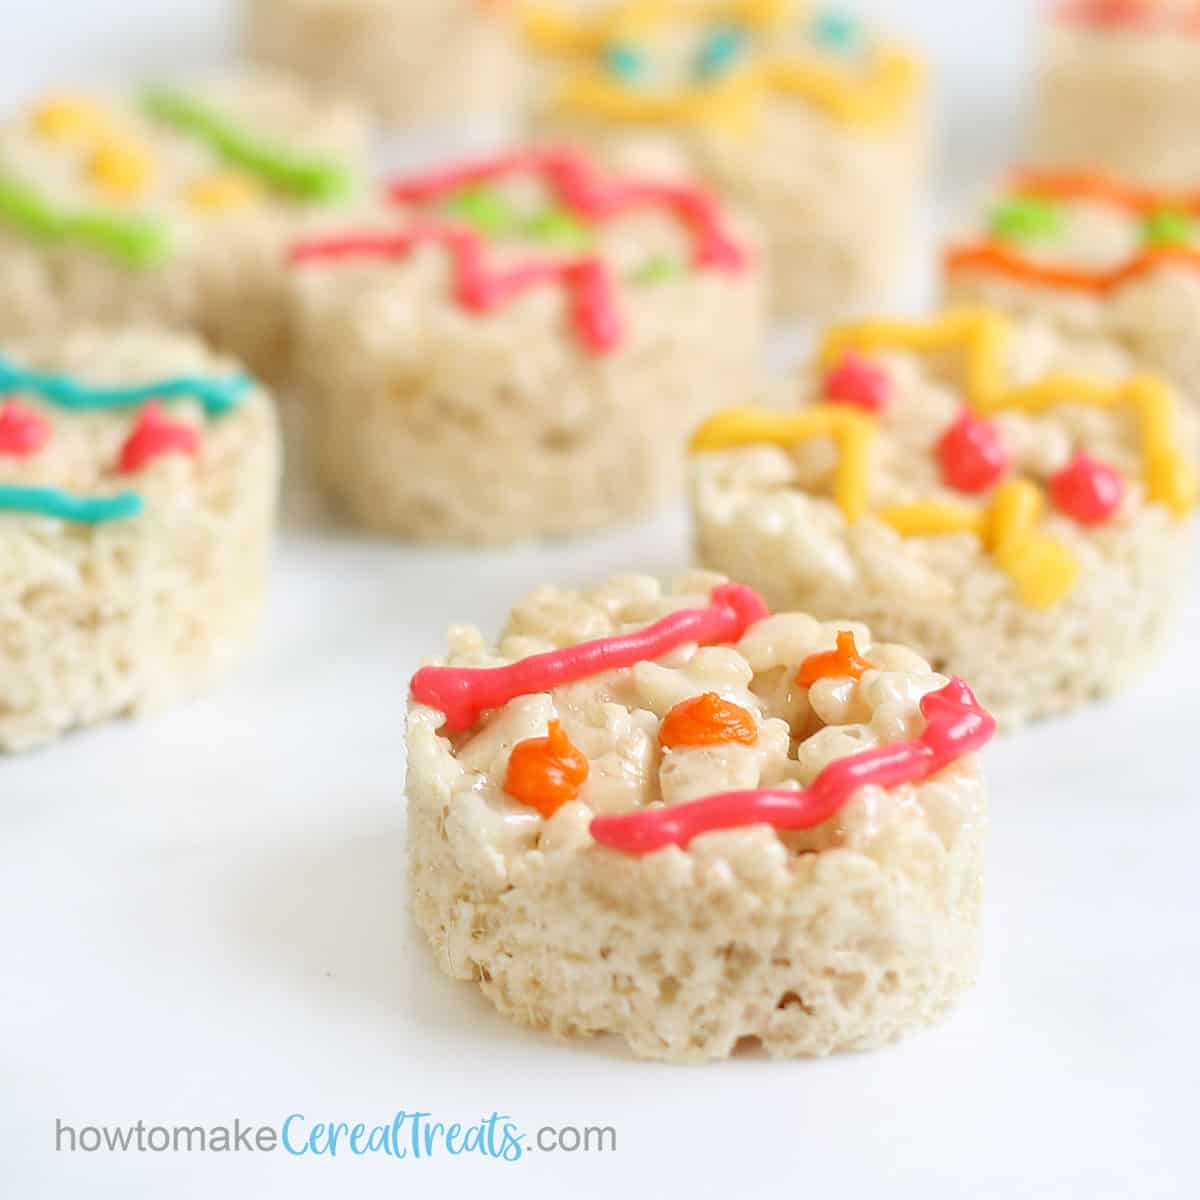 decorated Easter egg Rice Krispie treats with royal icing